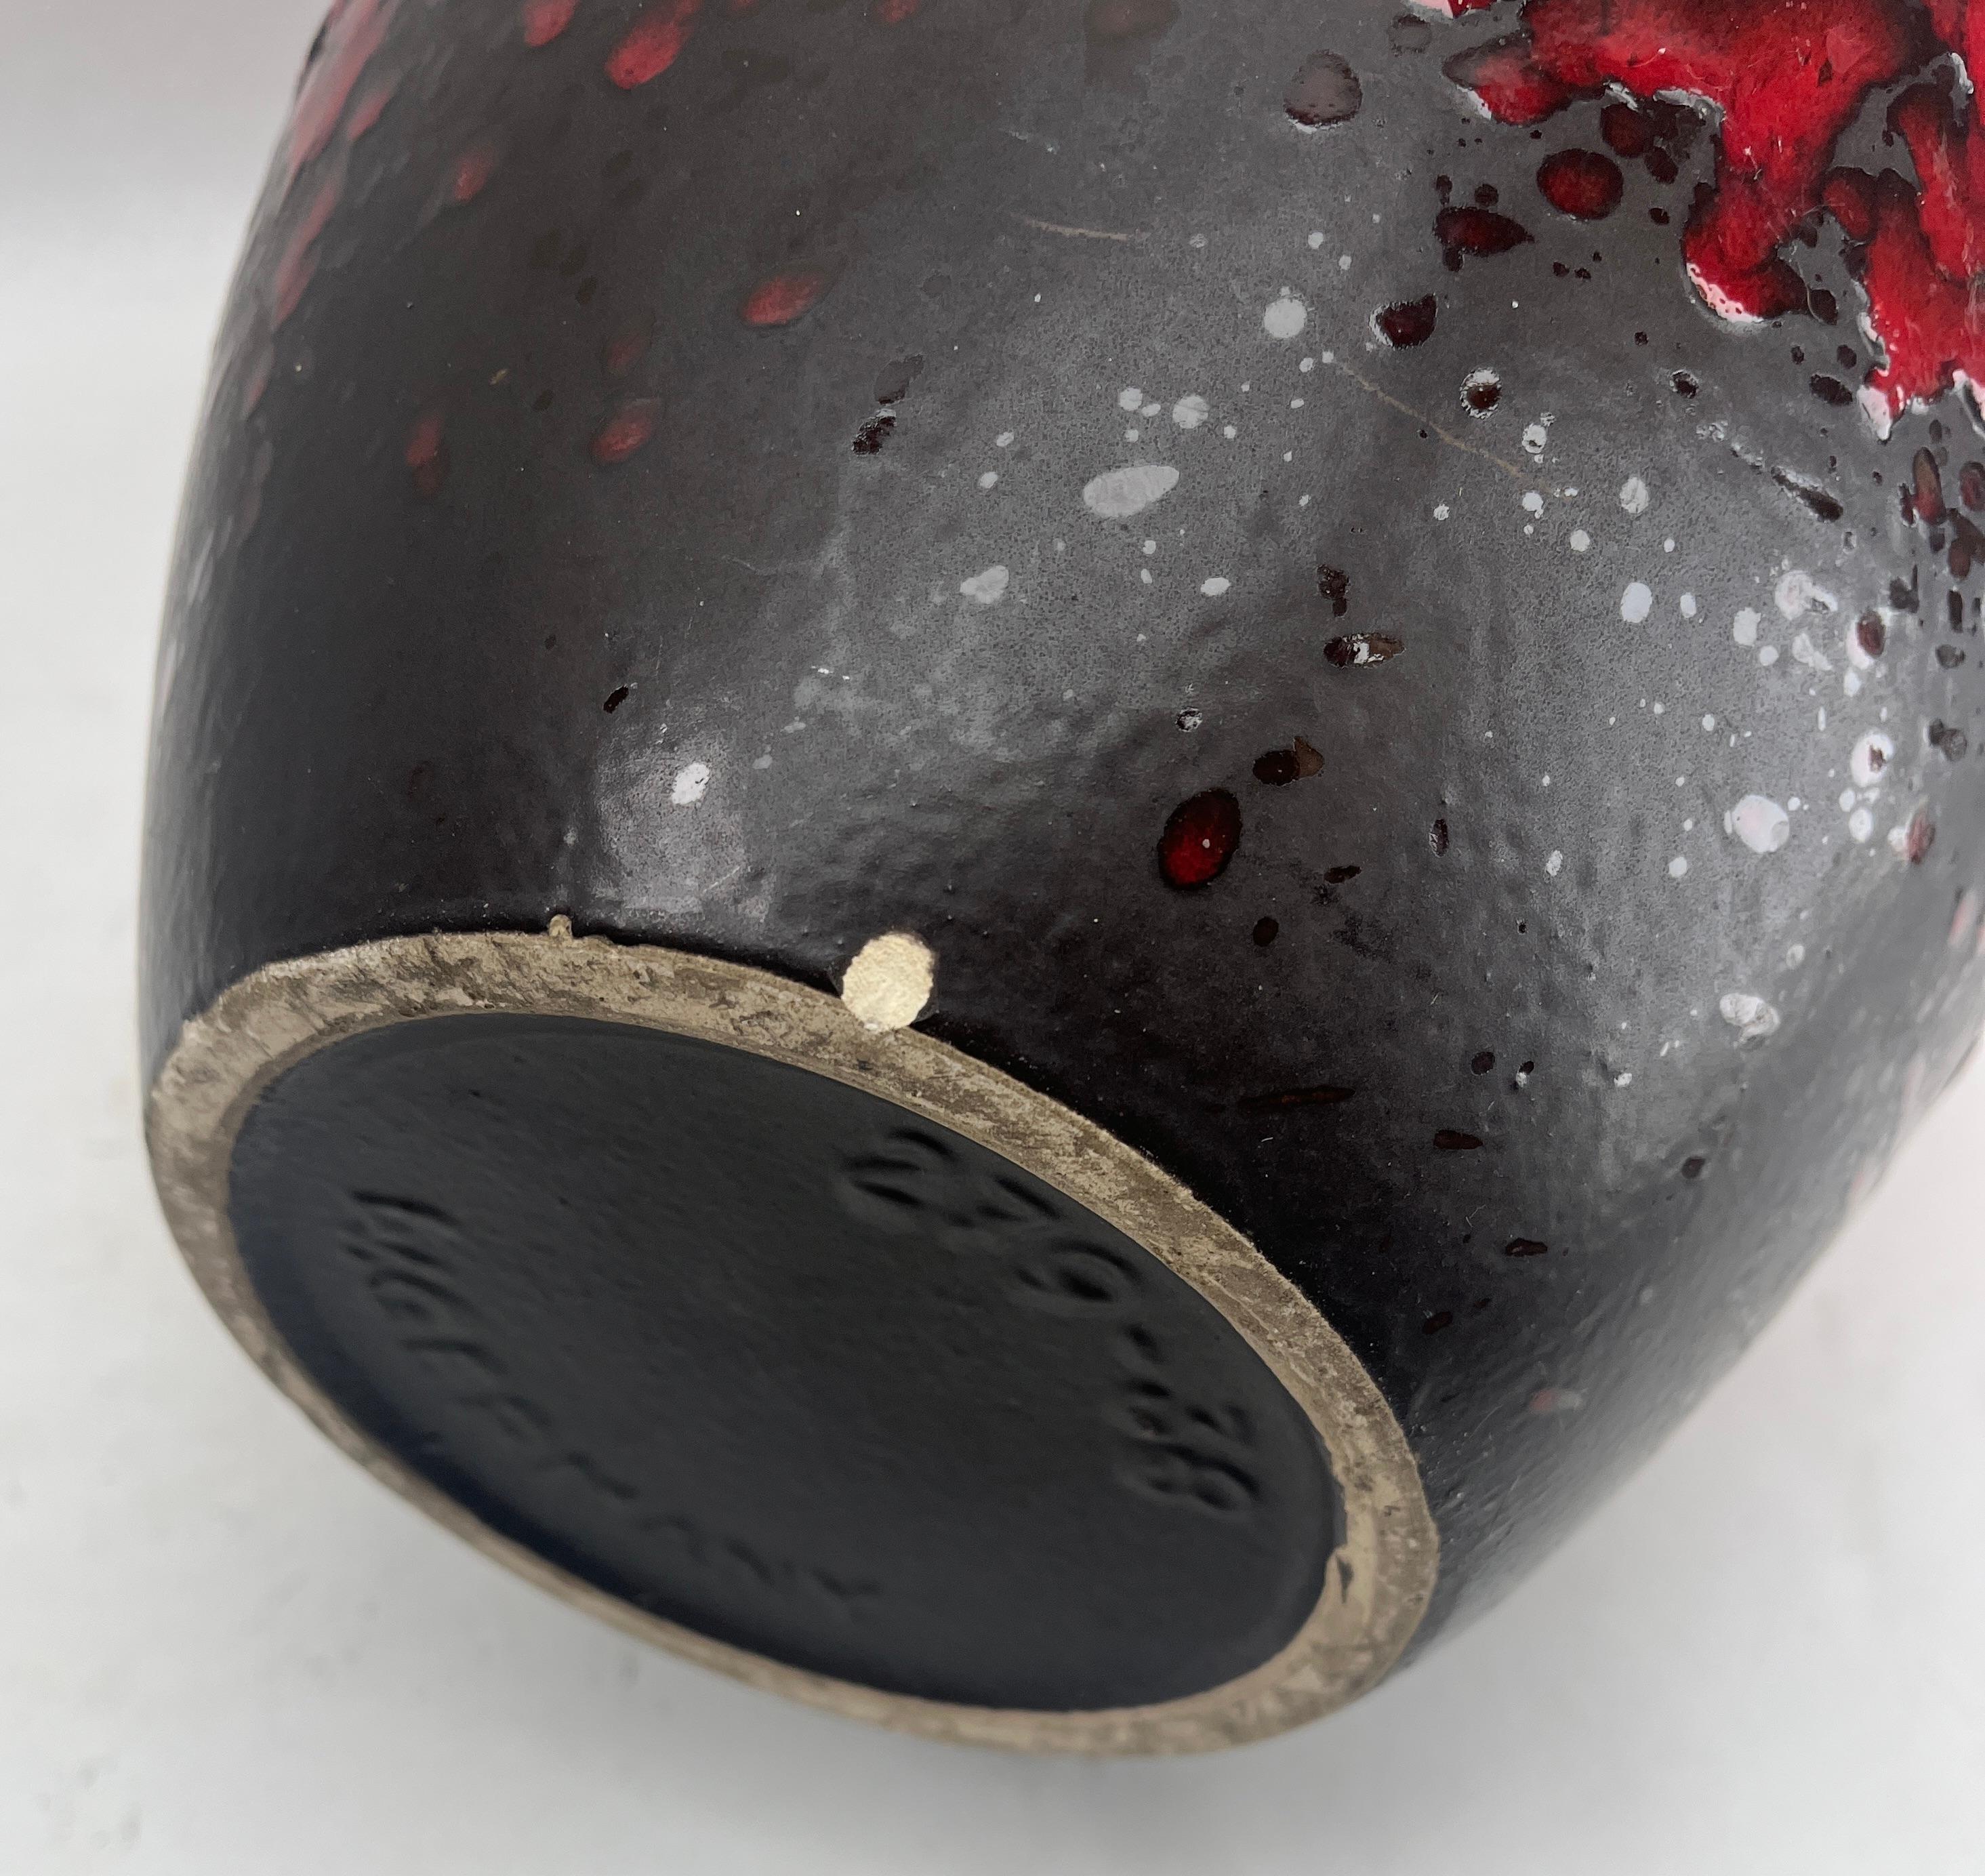 Fat Lava Floor Vase with Red Drip-Glaze 'Scheurich 279-38, W-Germany' 1960s For Sale 1